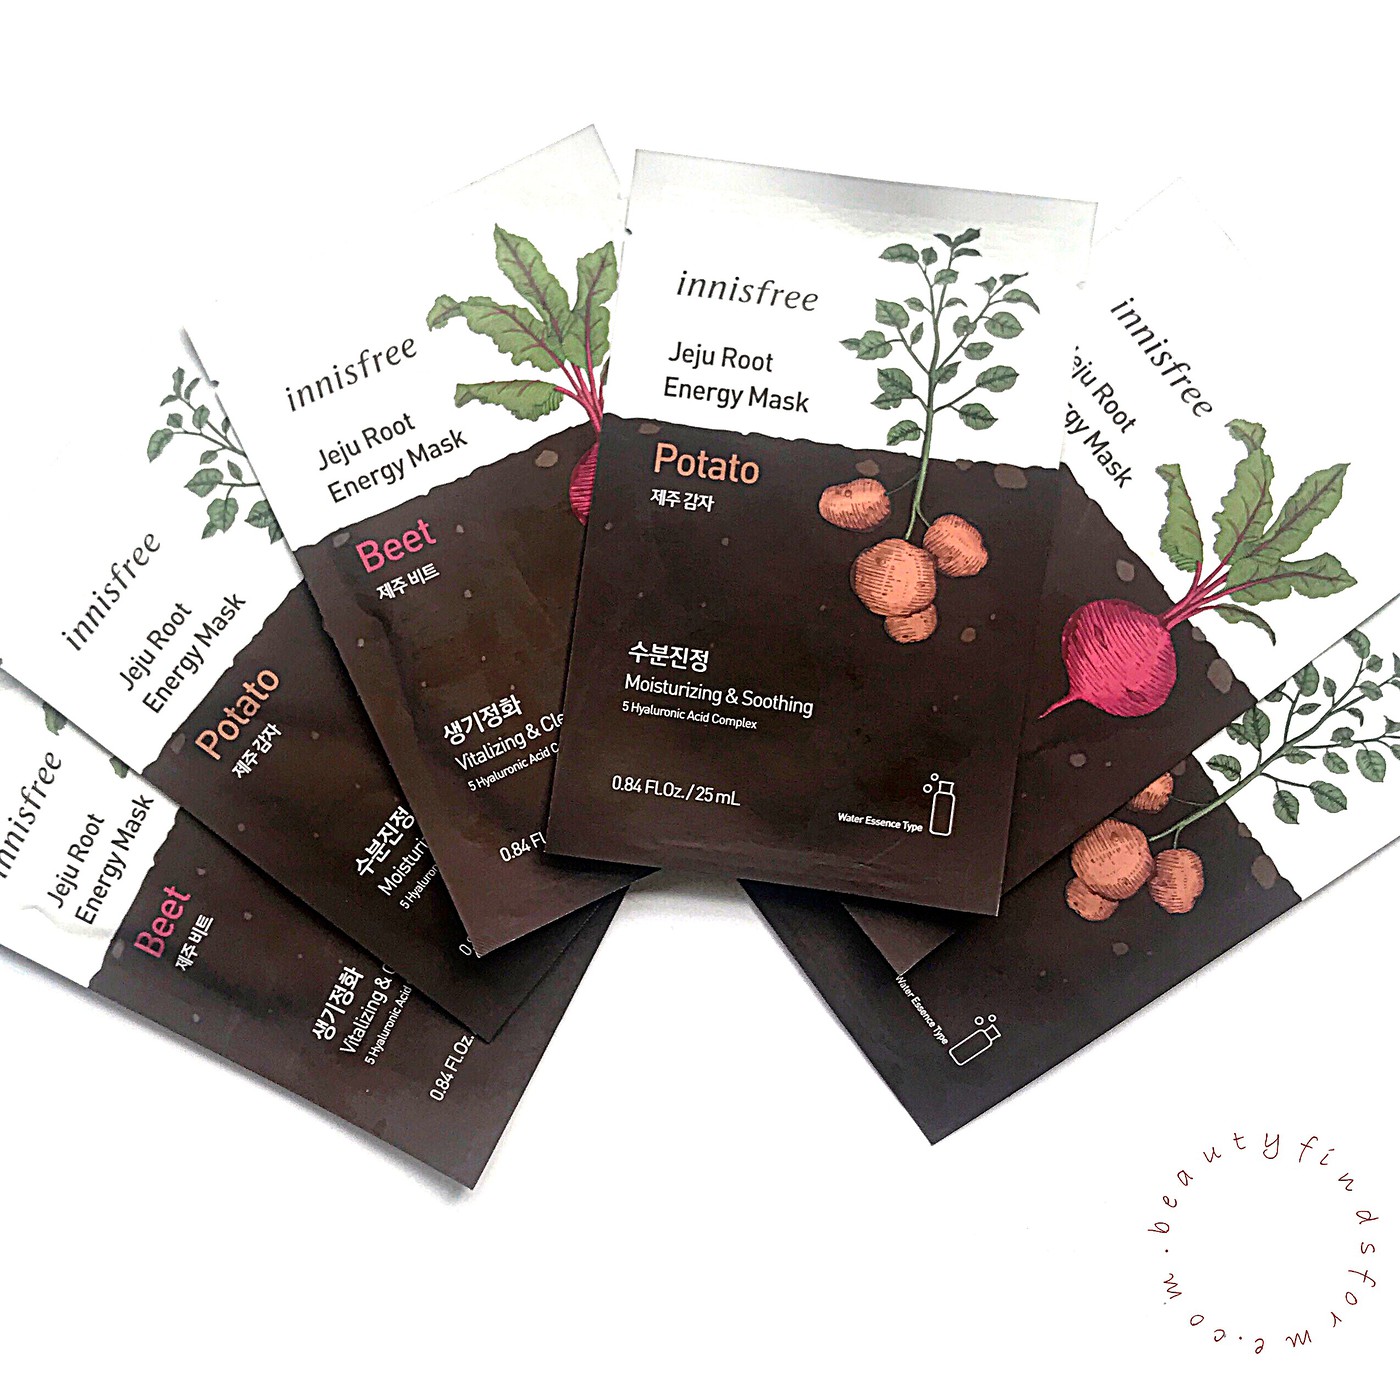 Jeju Root Mask Beet Potato Review – Unboxing